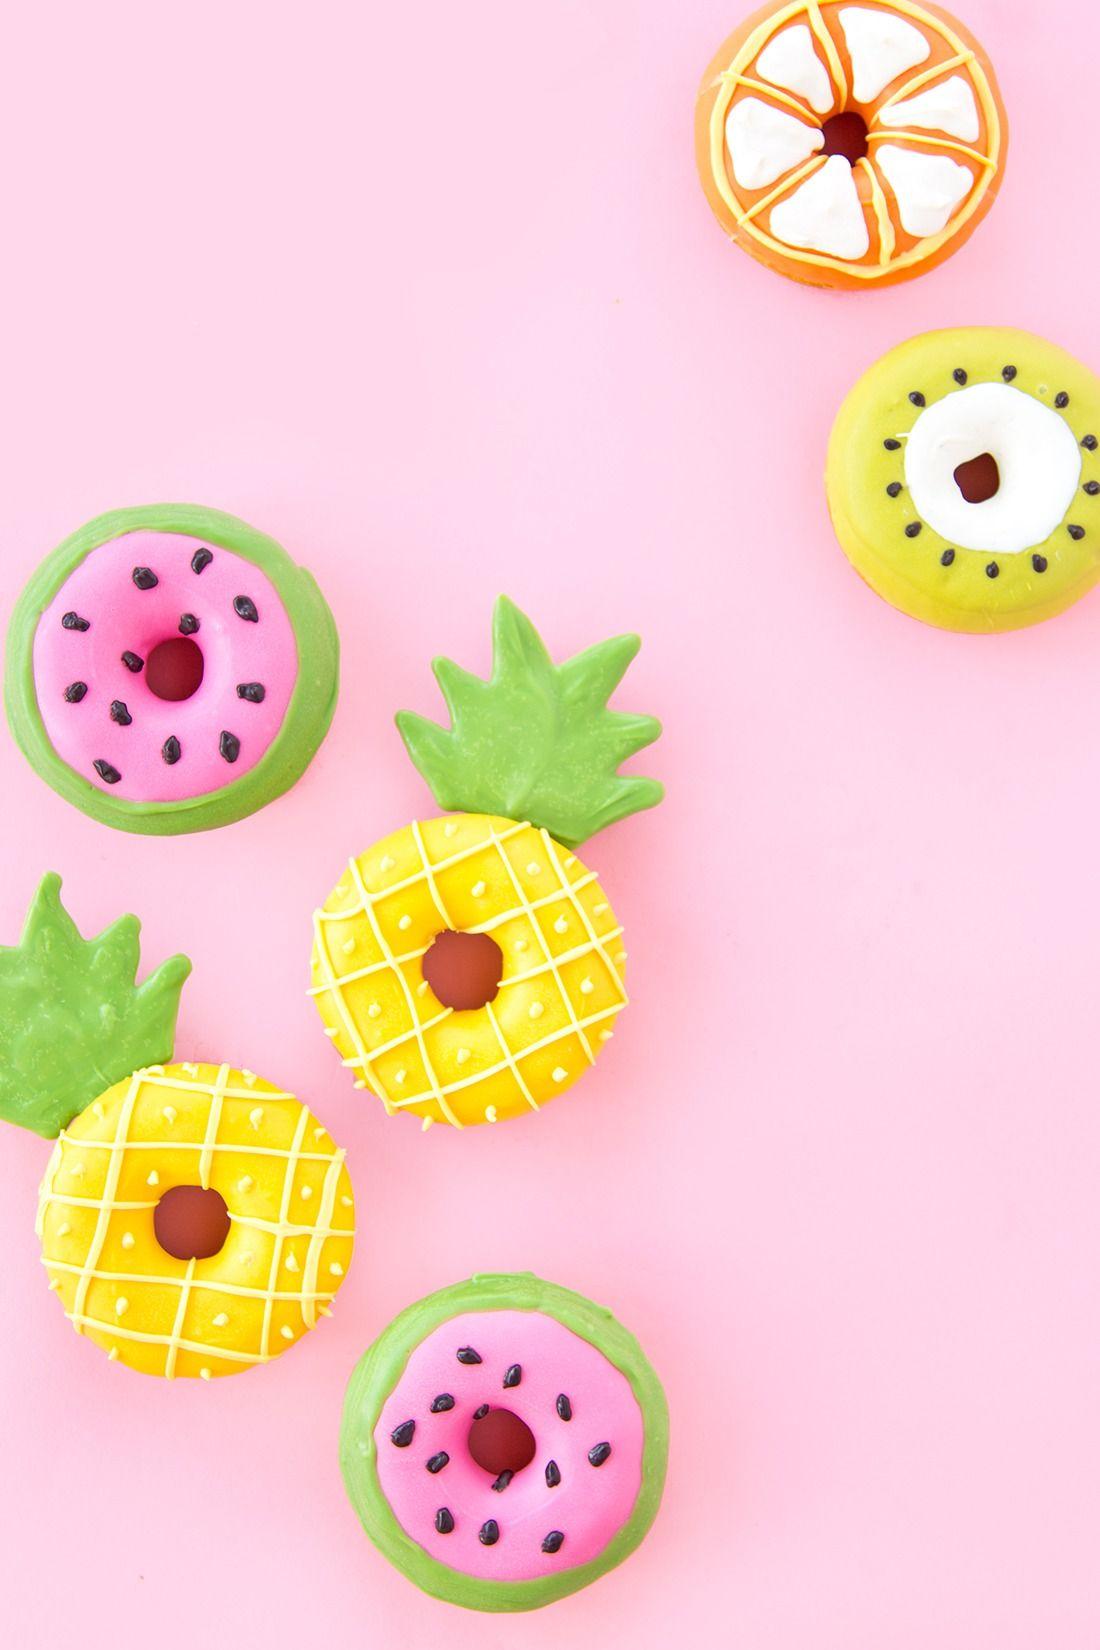  Cute Fruit Wallpapers Top Free Cute Fruit Backgrounds 